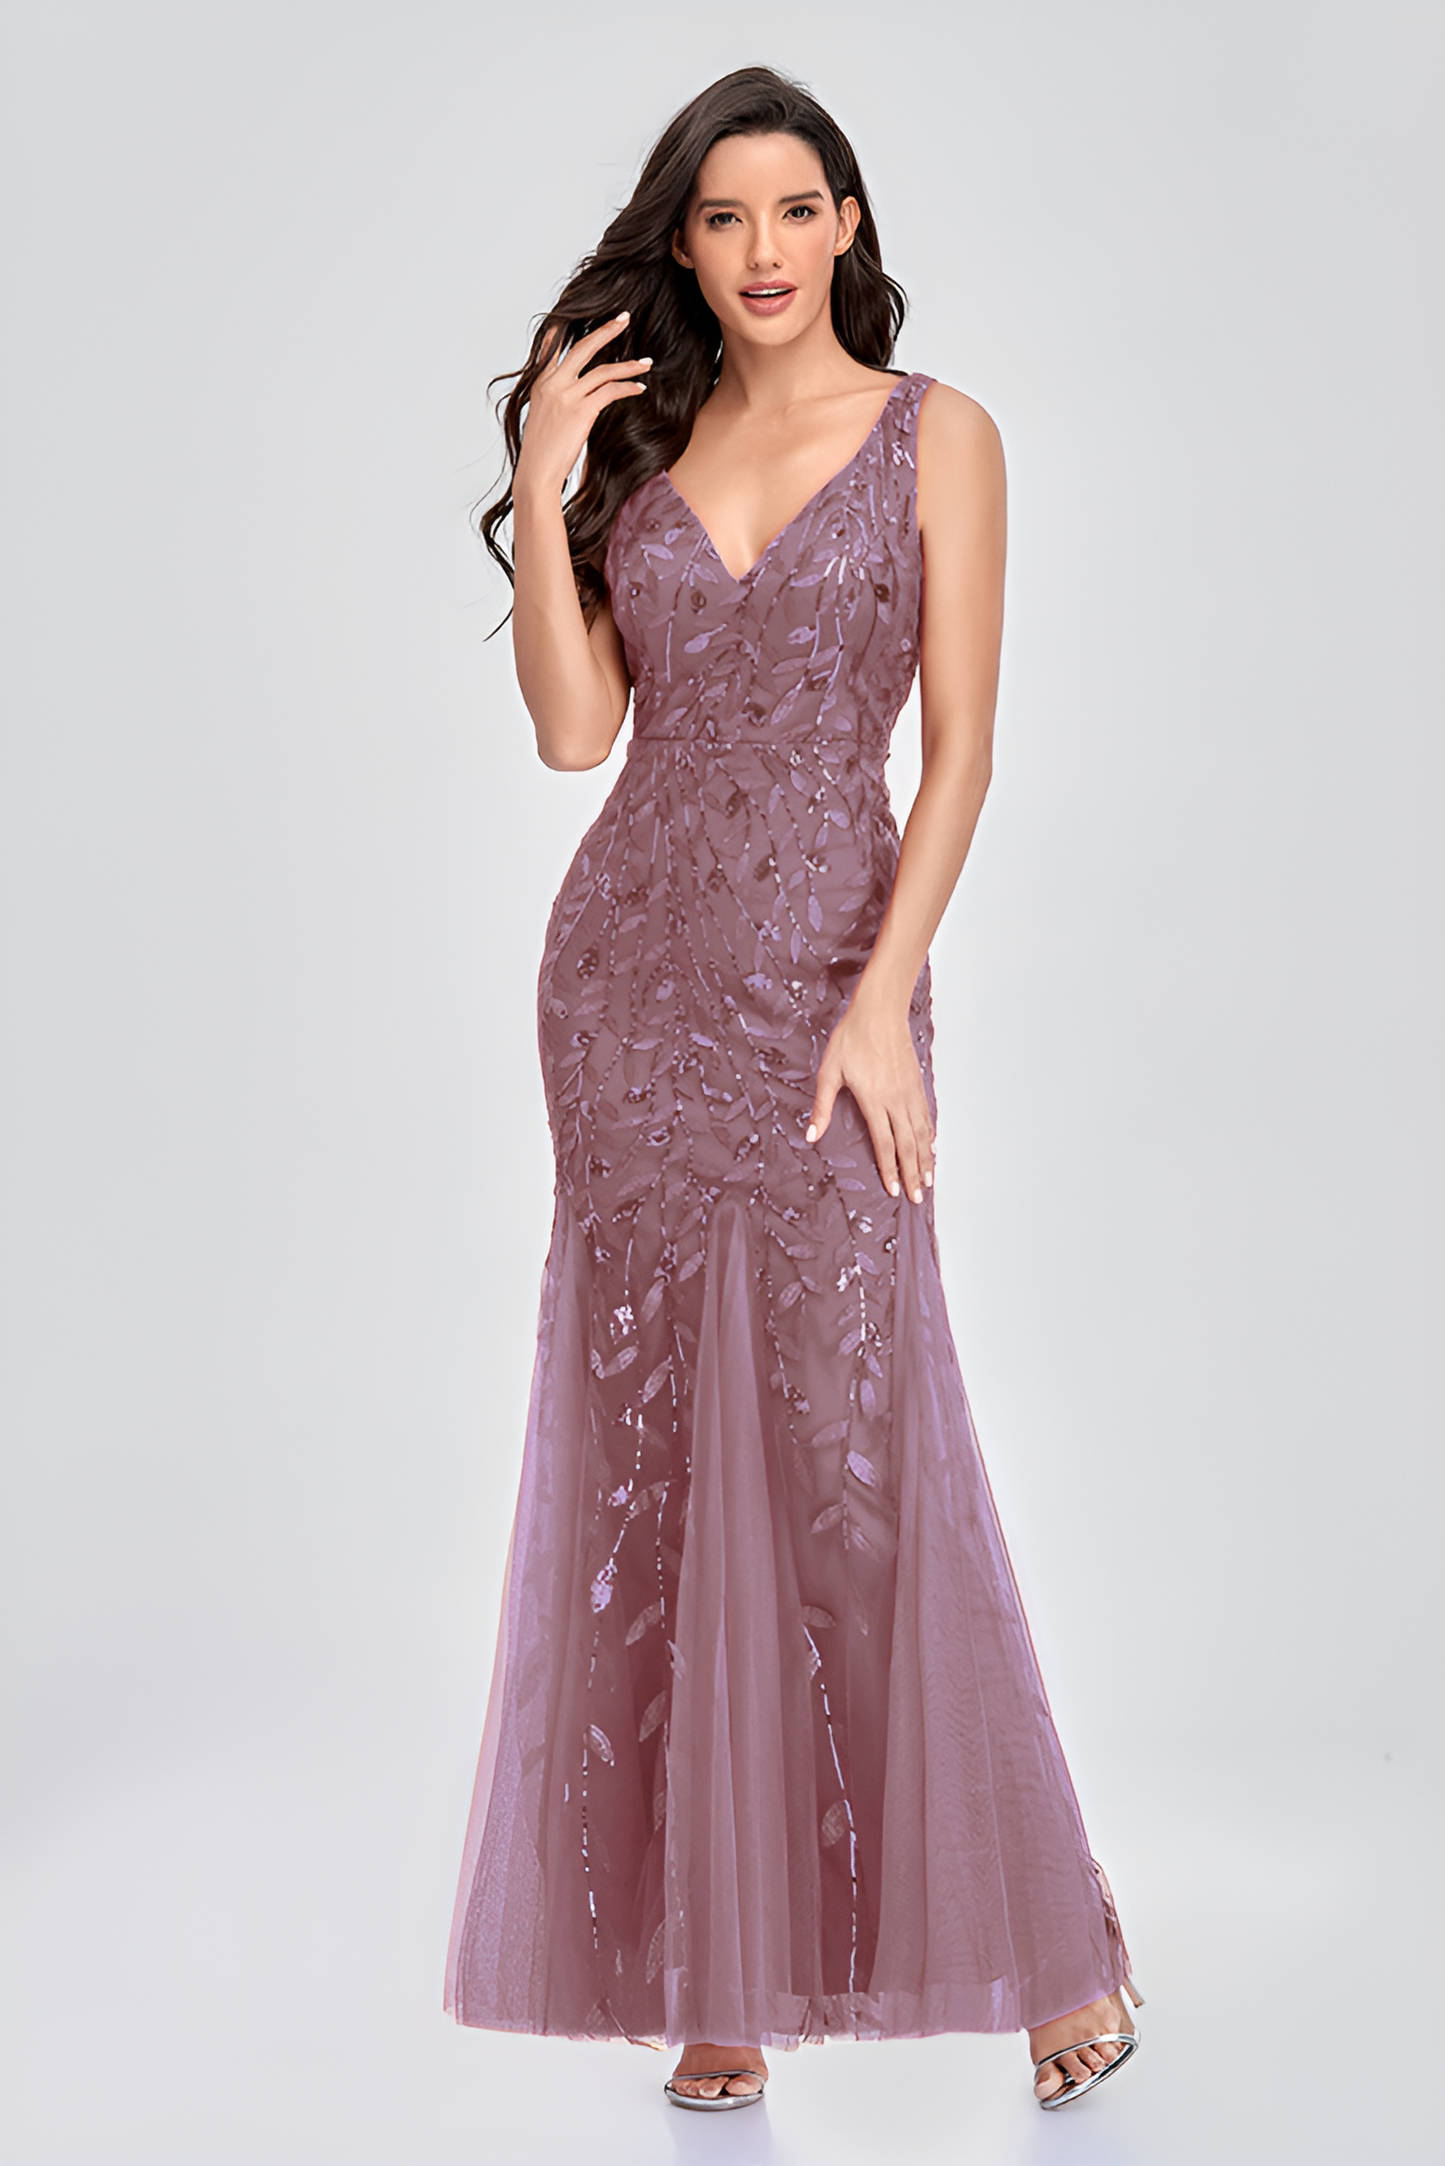 Sisakphoto™-Evening dress v-neck tulle embroidered sequin sexy mermaid ball gown